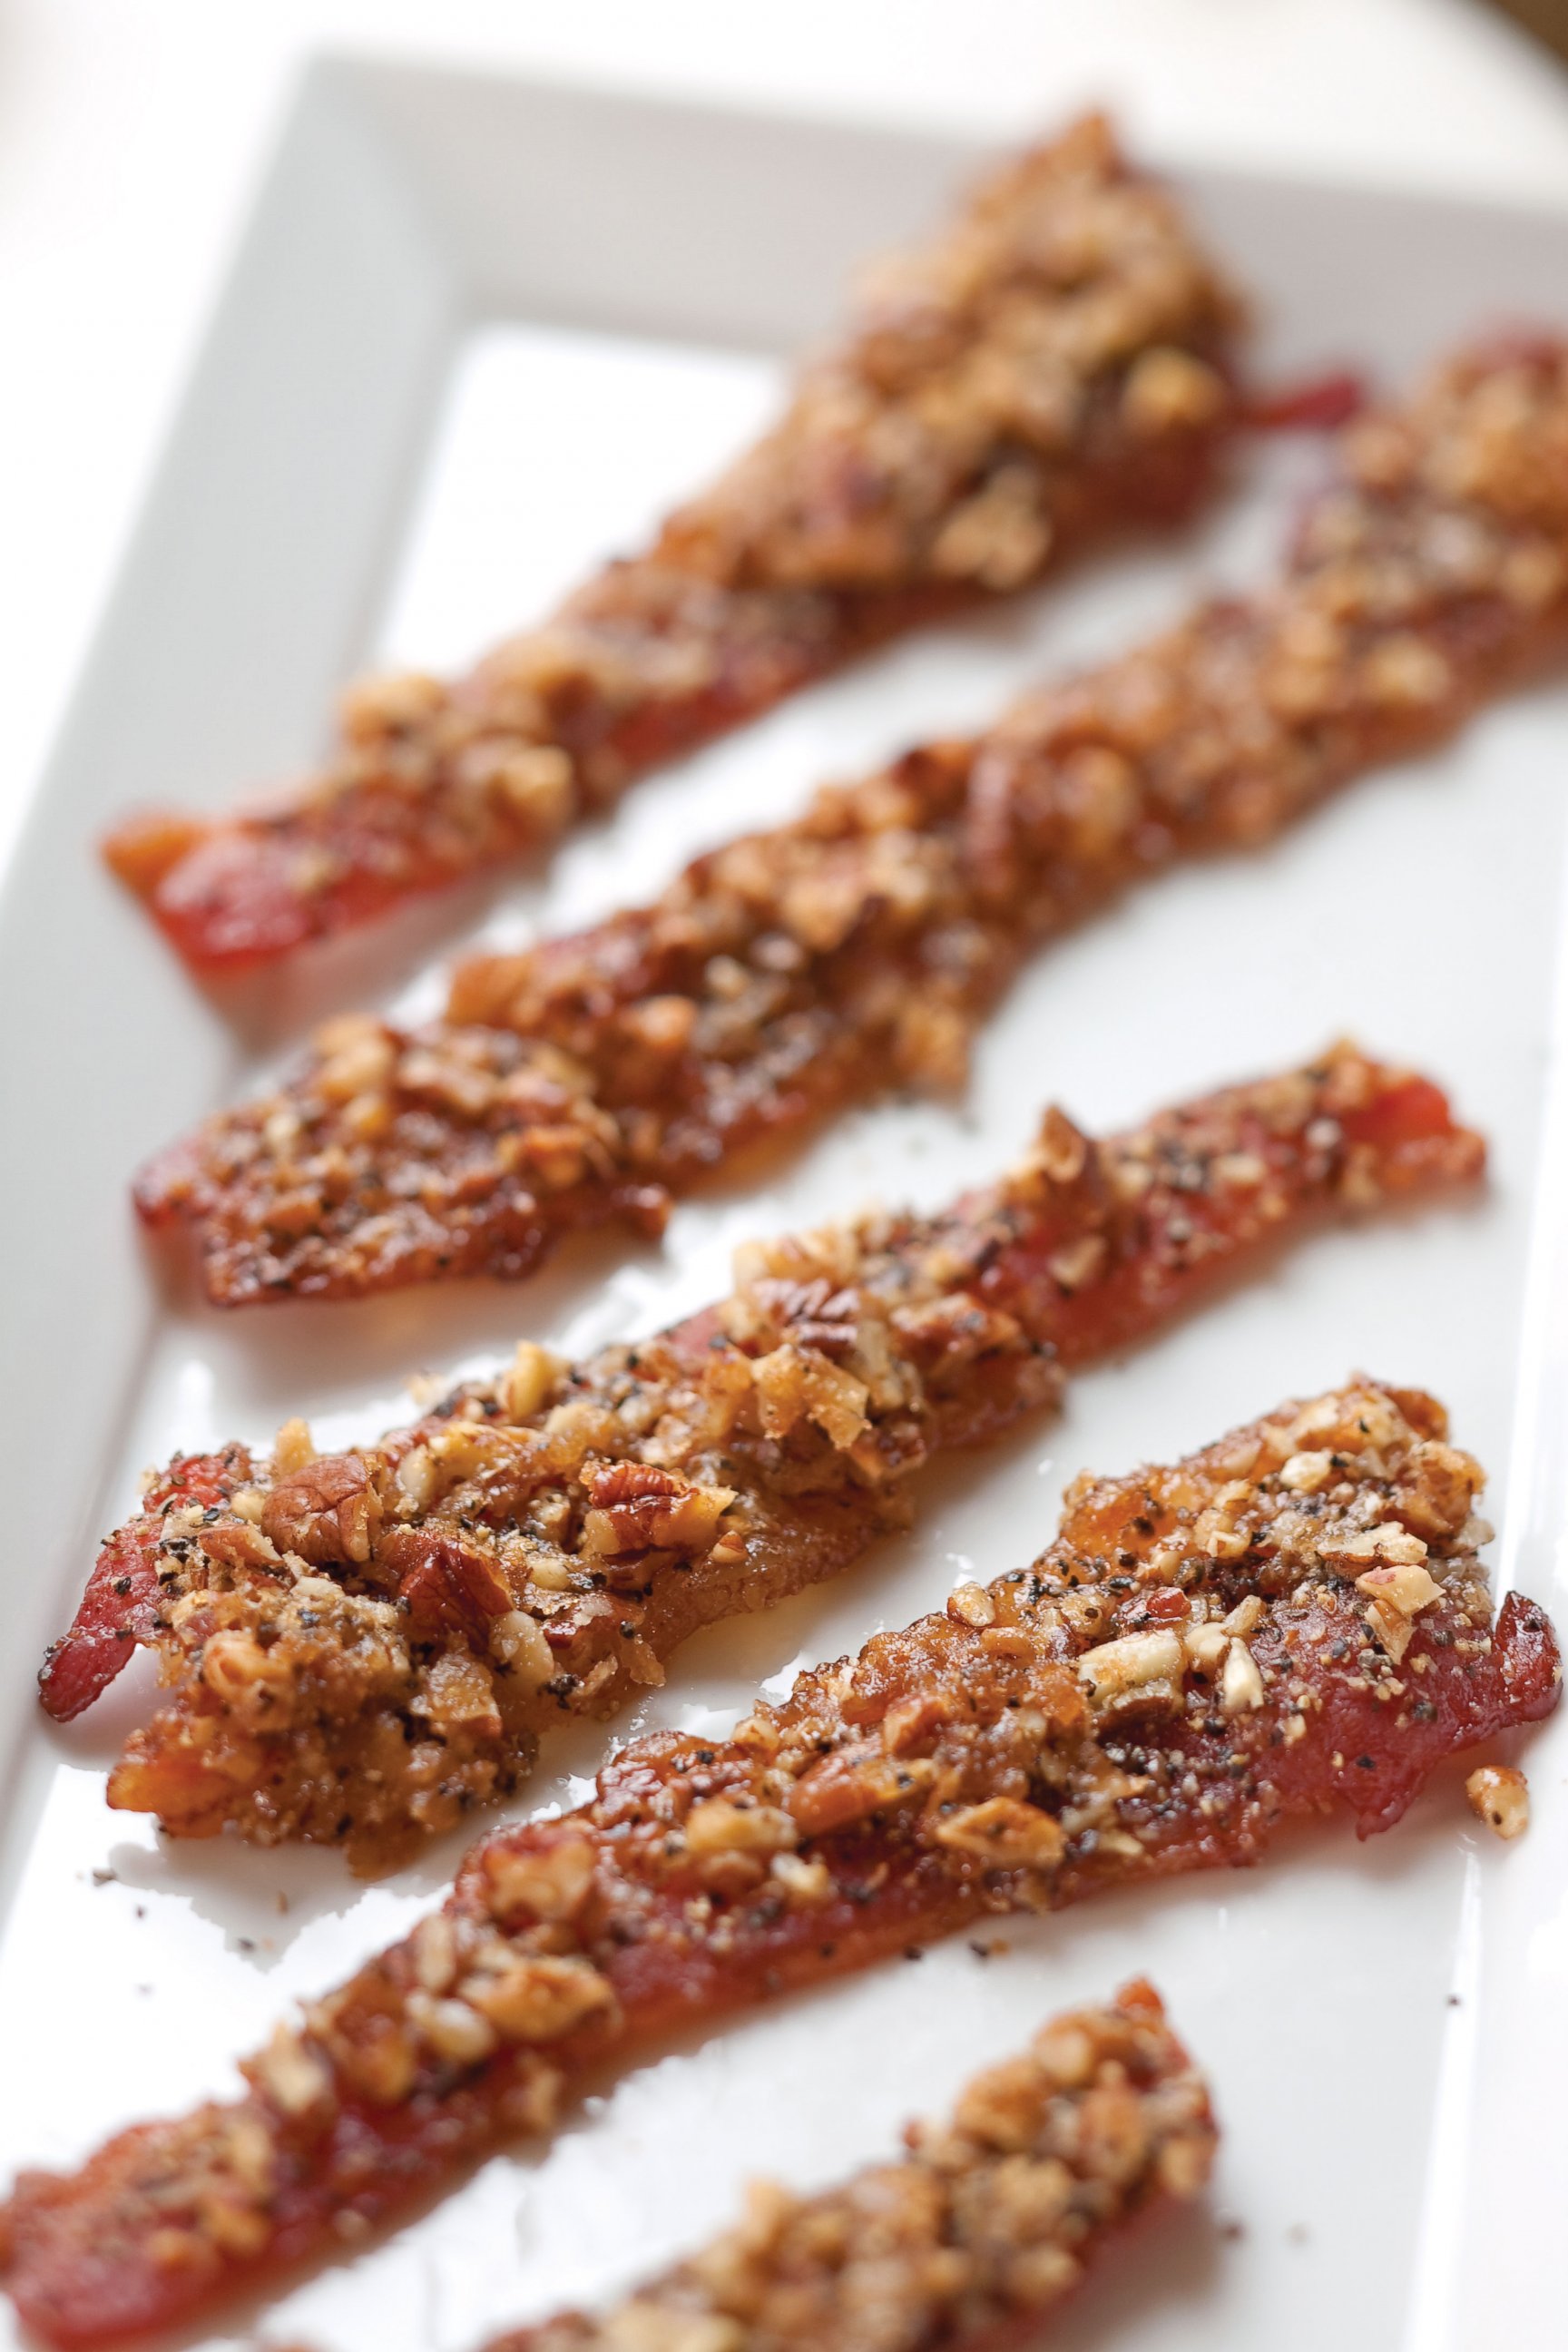 PHOTO: A photo of Sandra Lee's Recipe for Sugar-and-Spice Bacon.